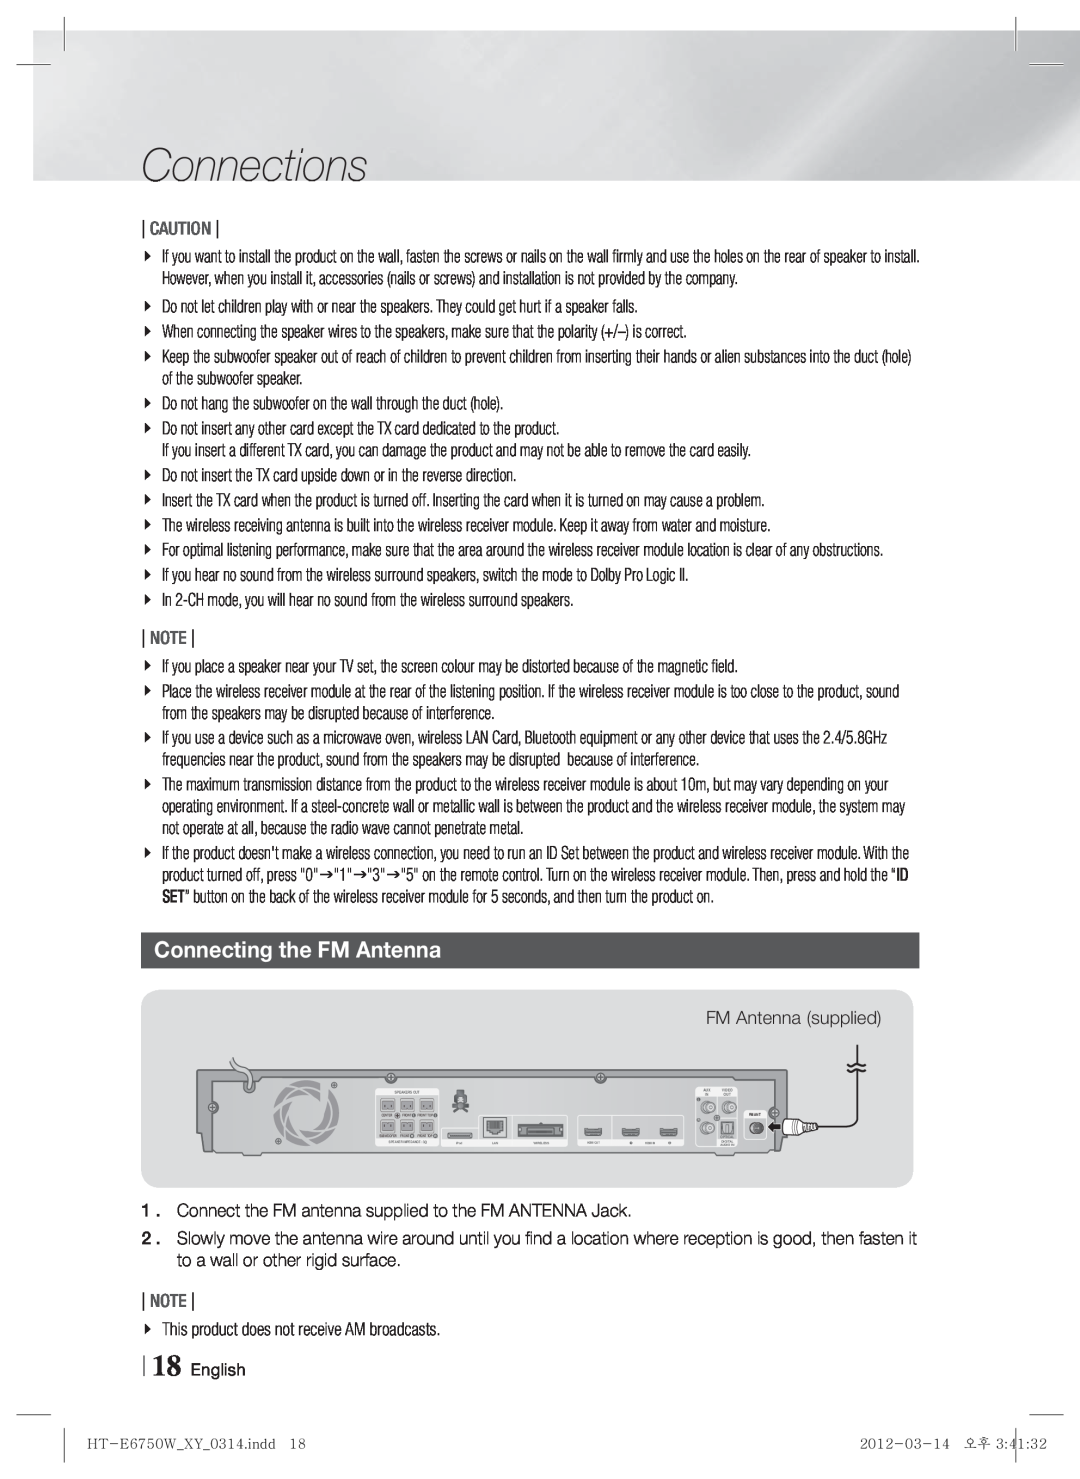 Samsung HT-E6750W user manual Connecting the FM Antenna, Connections, Caution, Note 